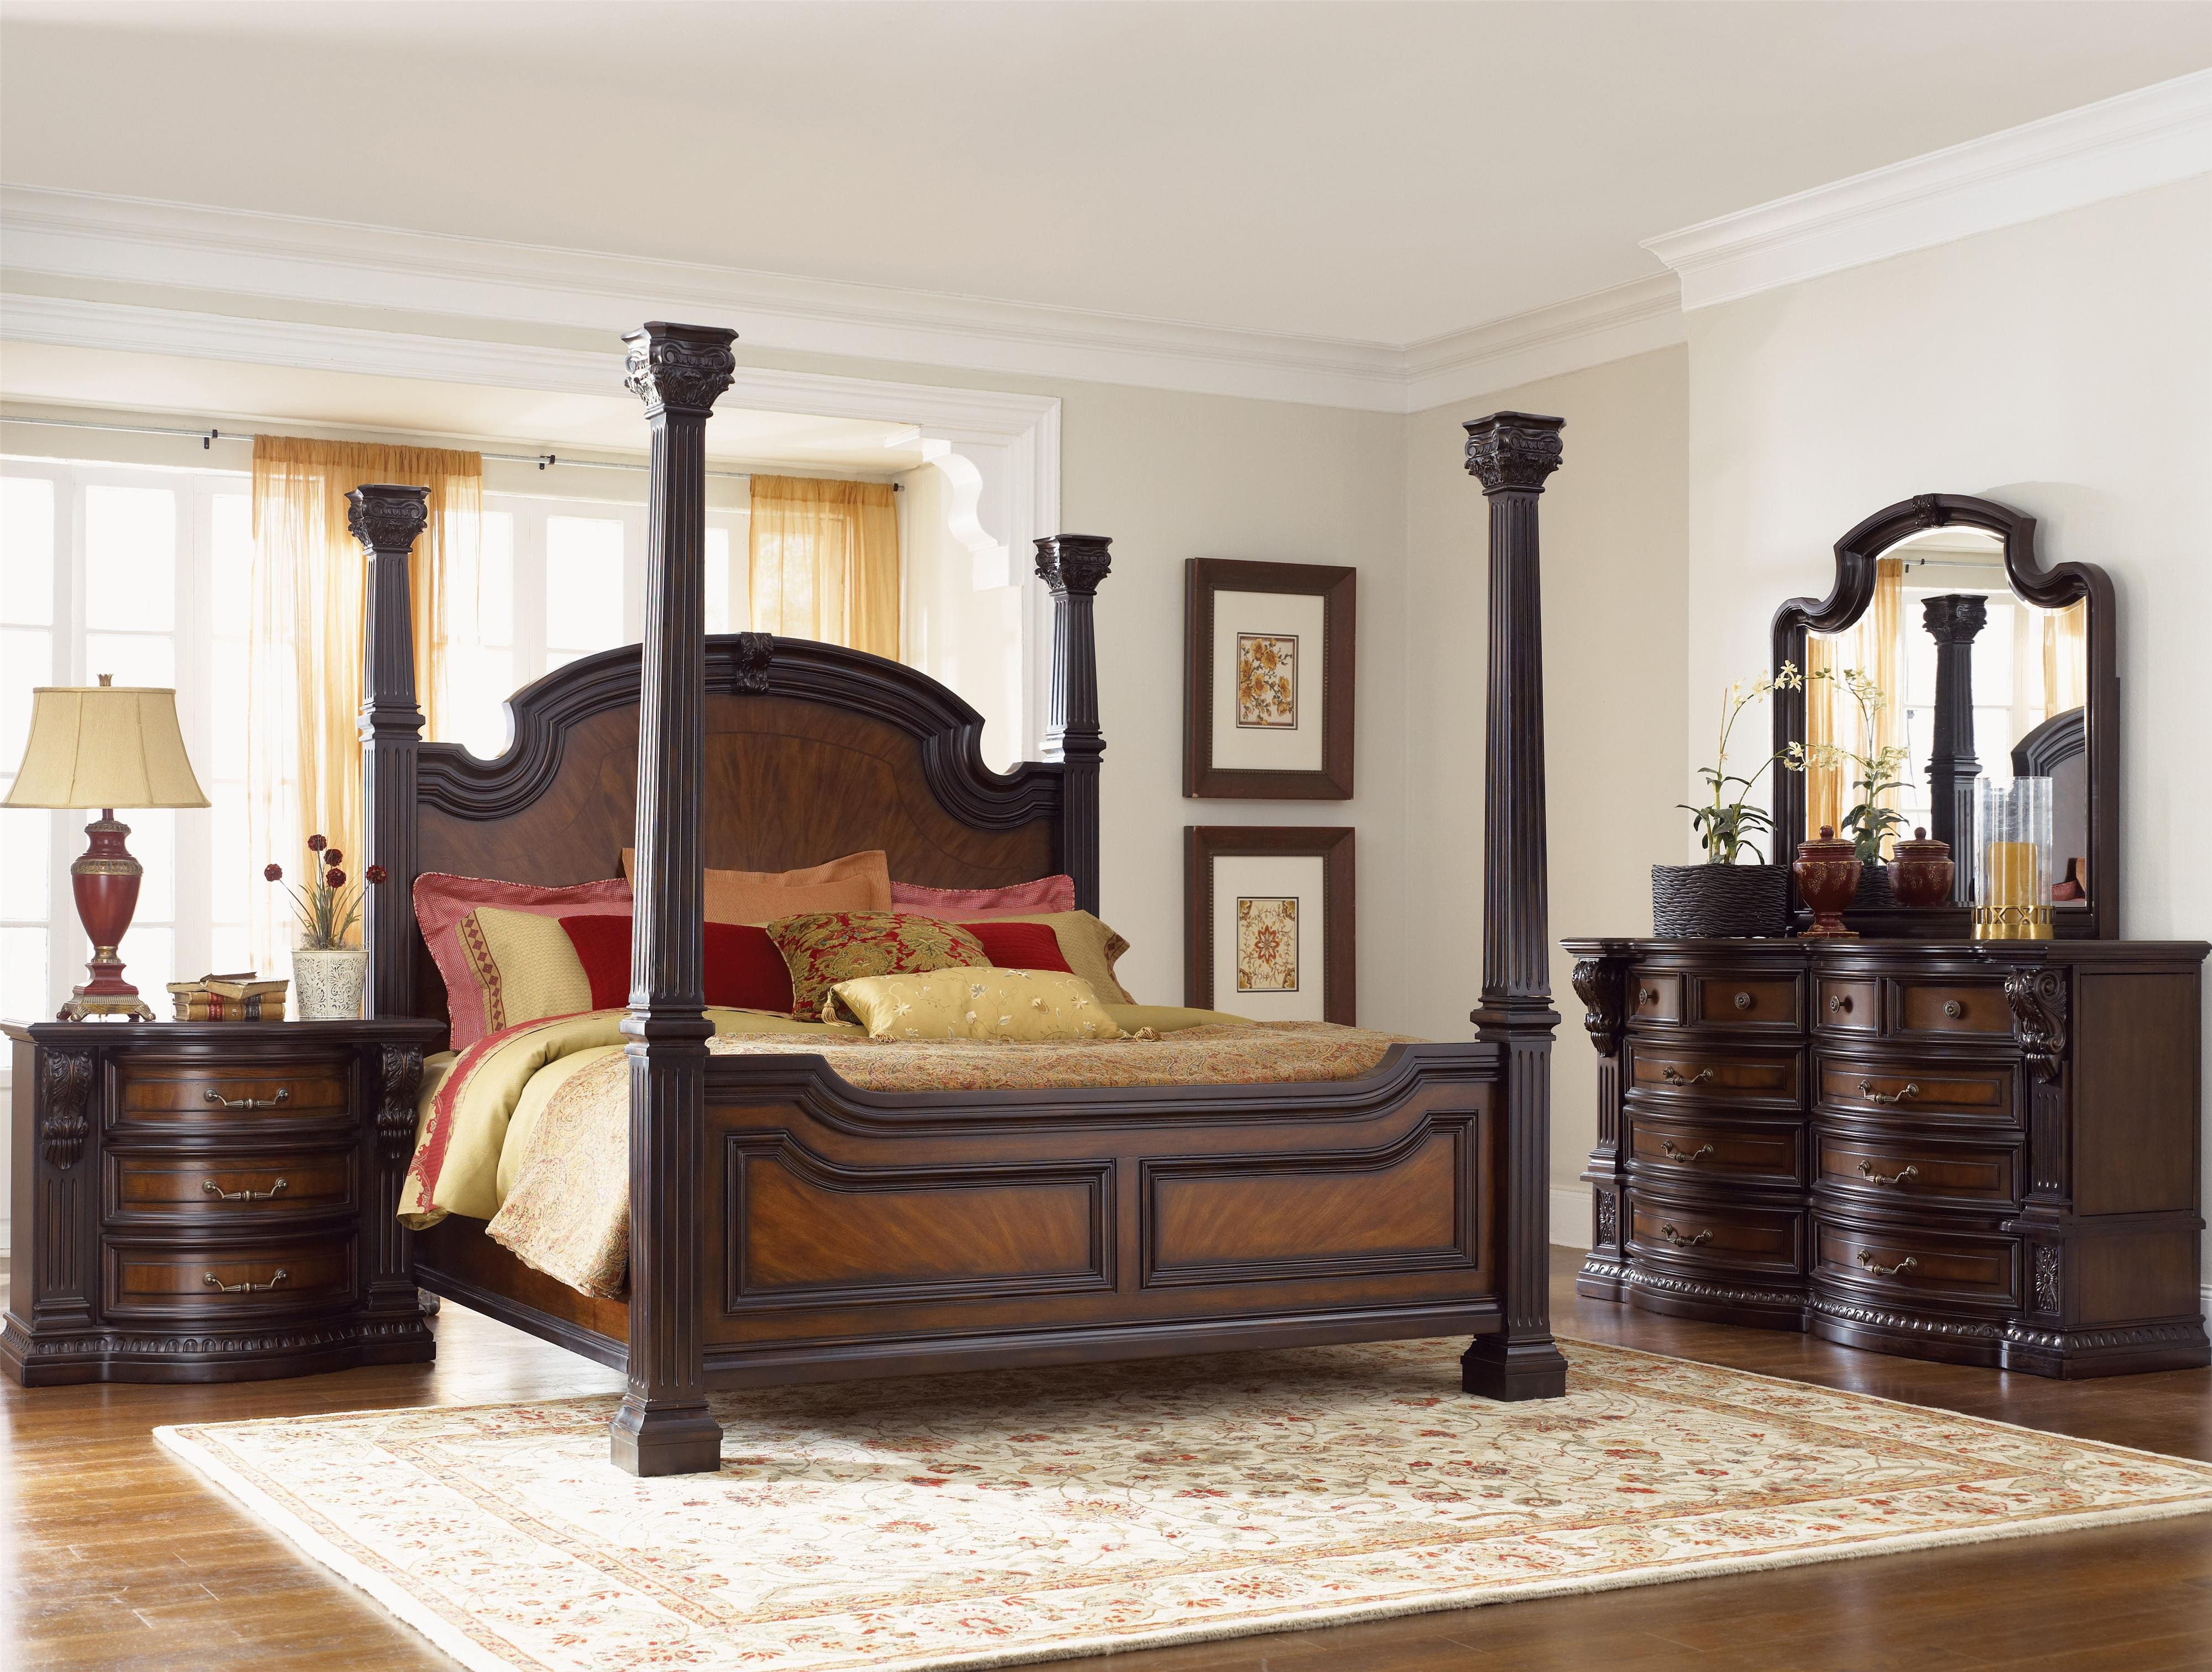 King Bedroom Set with Mattress Inspirational Grand Estates 02 by Fairmont Designs Royal Furniture